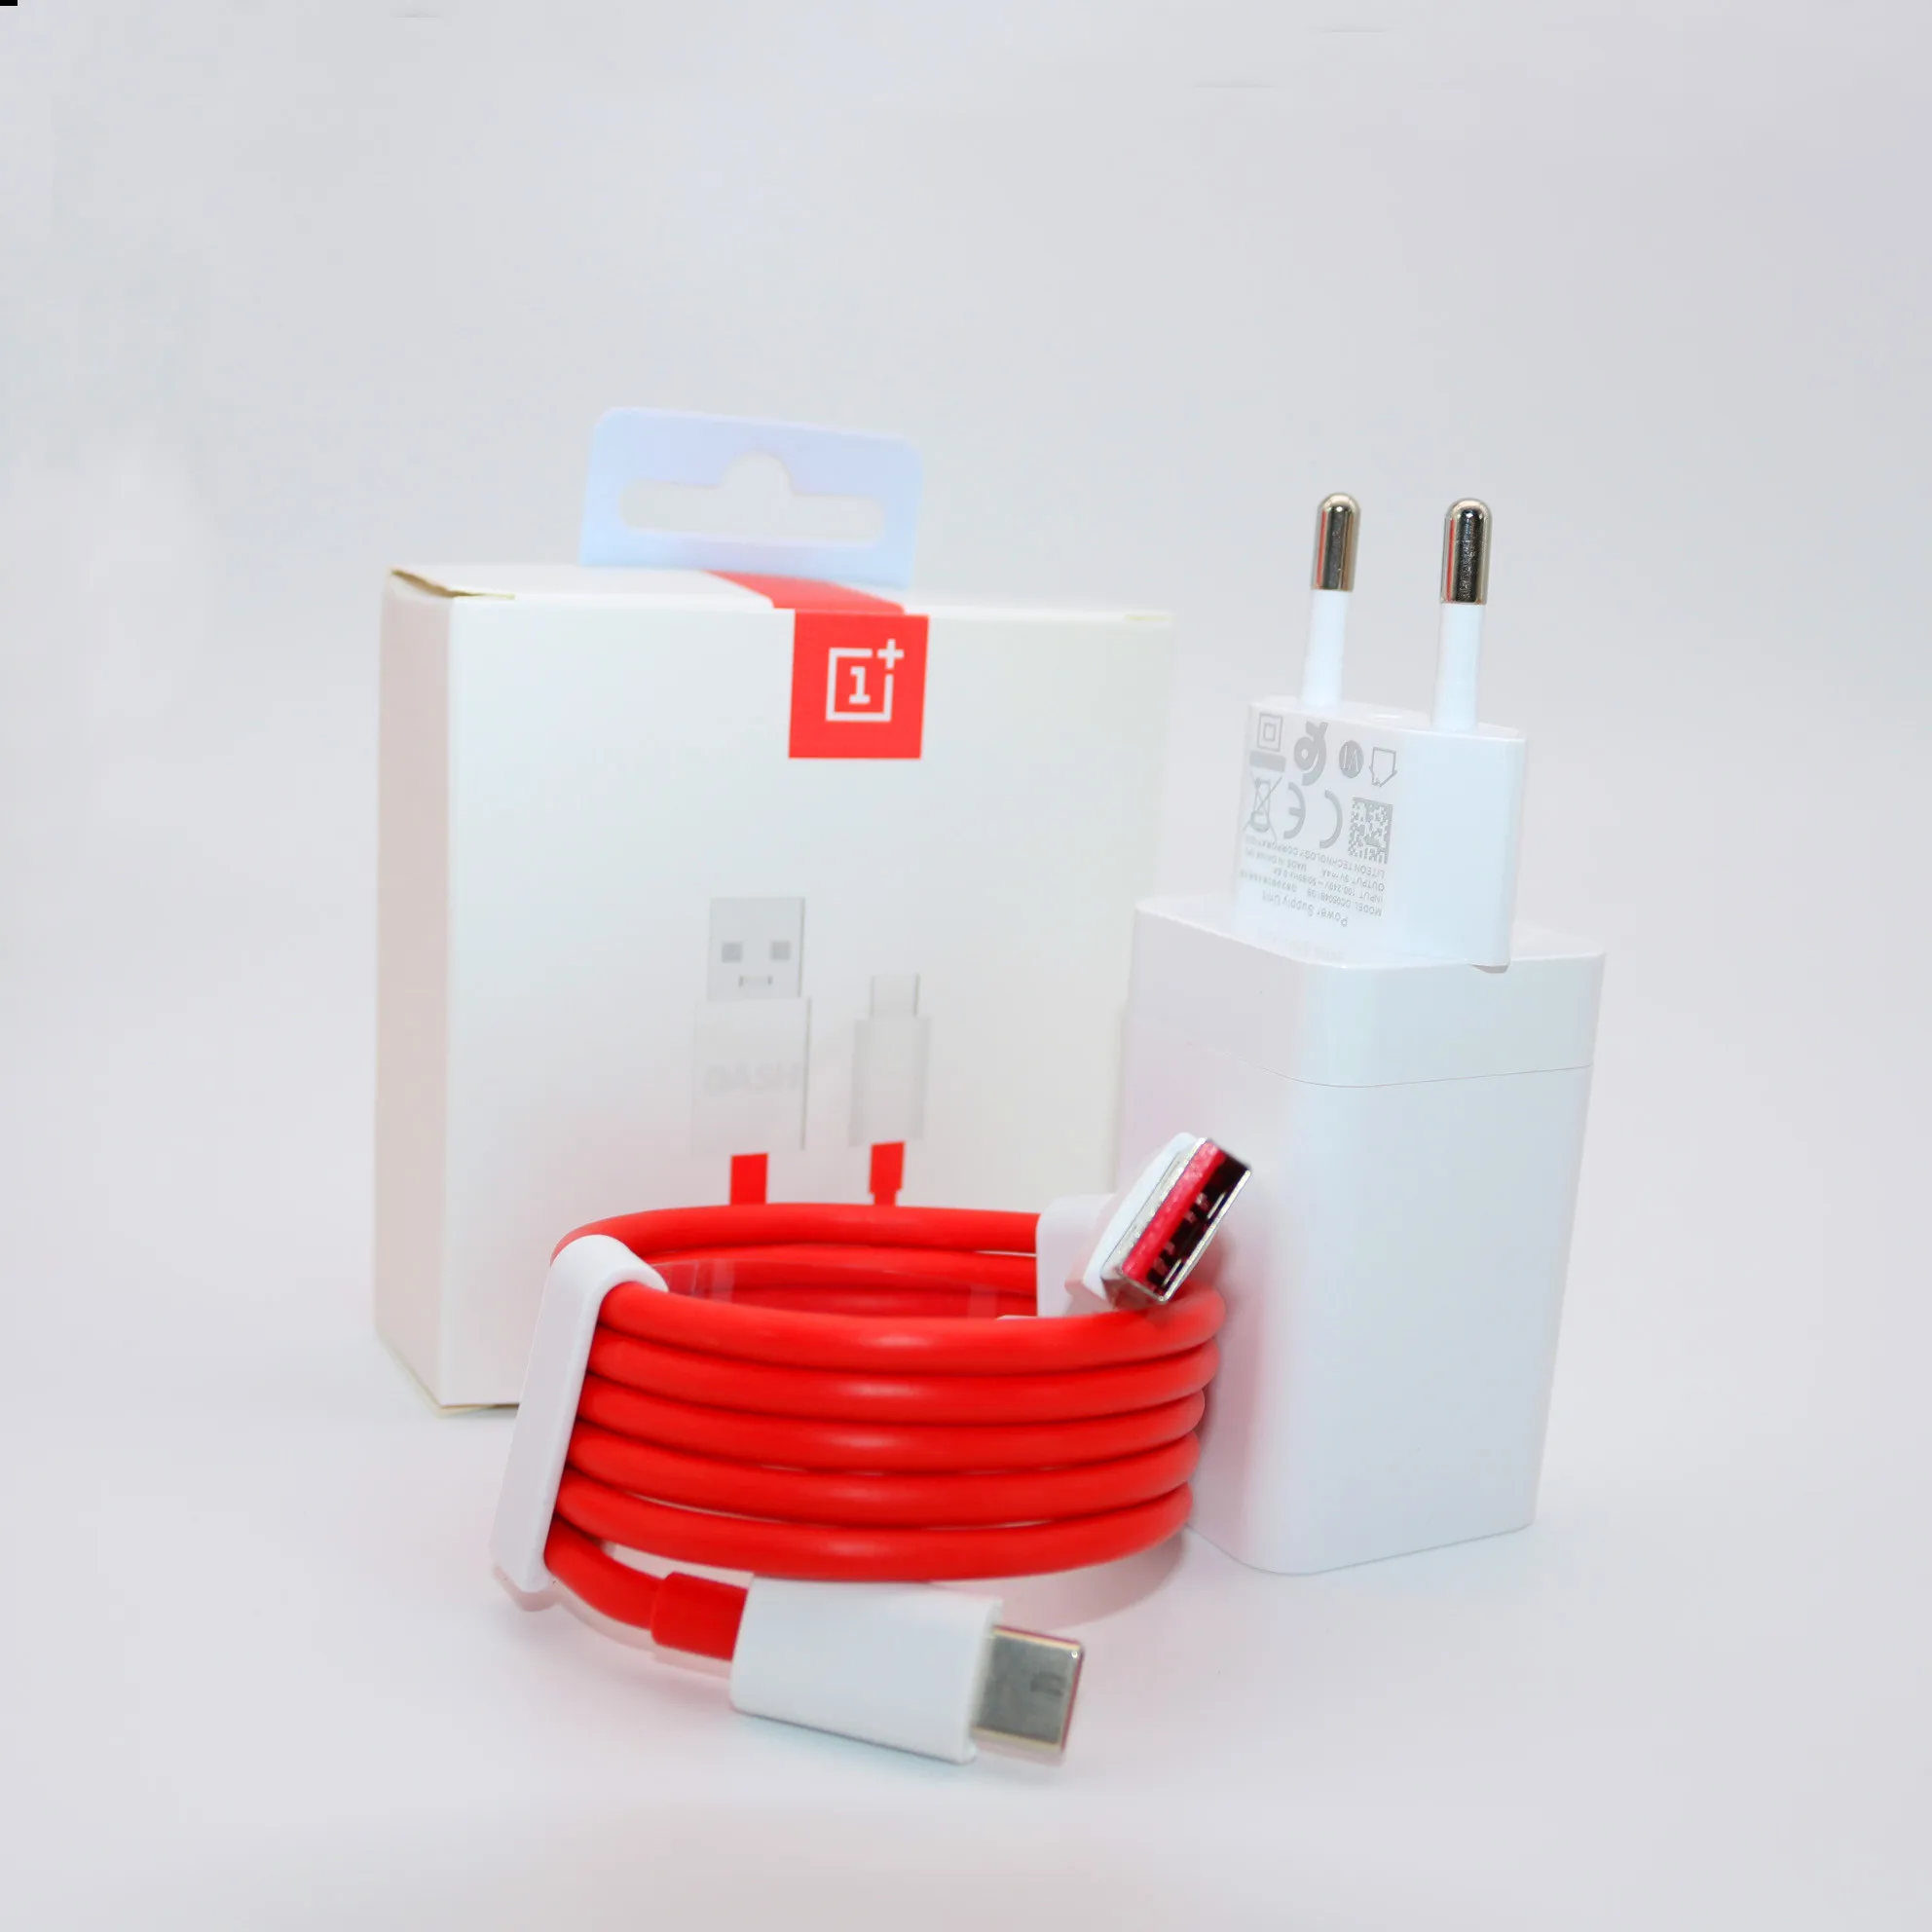 Original Oneplus EU Charger 5V4A car Dash charger For One plus 6T 5/5T/3/3T Dash Charge Adapter Dash 4A USB Charge Type C Cable usb c fast charge Chargers